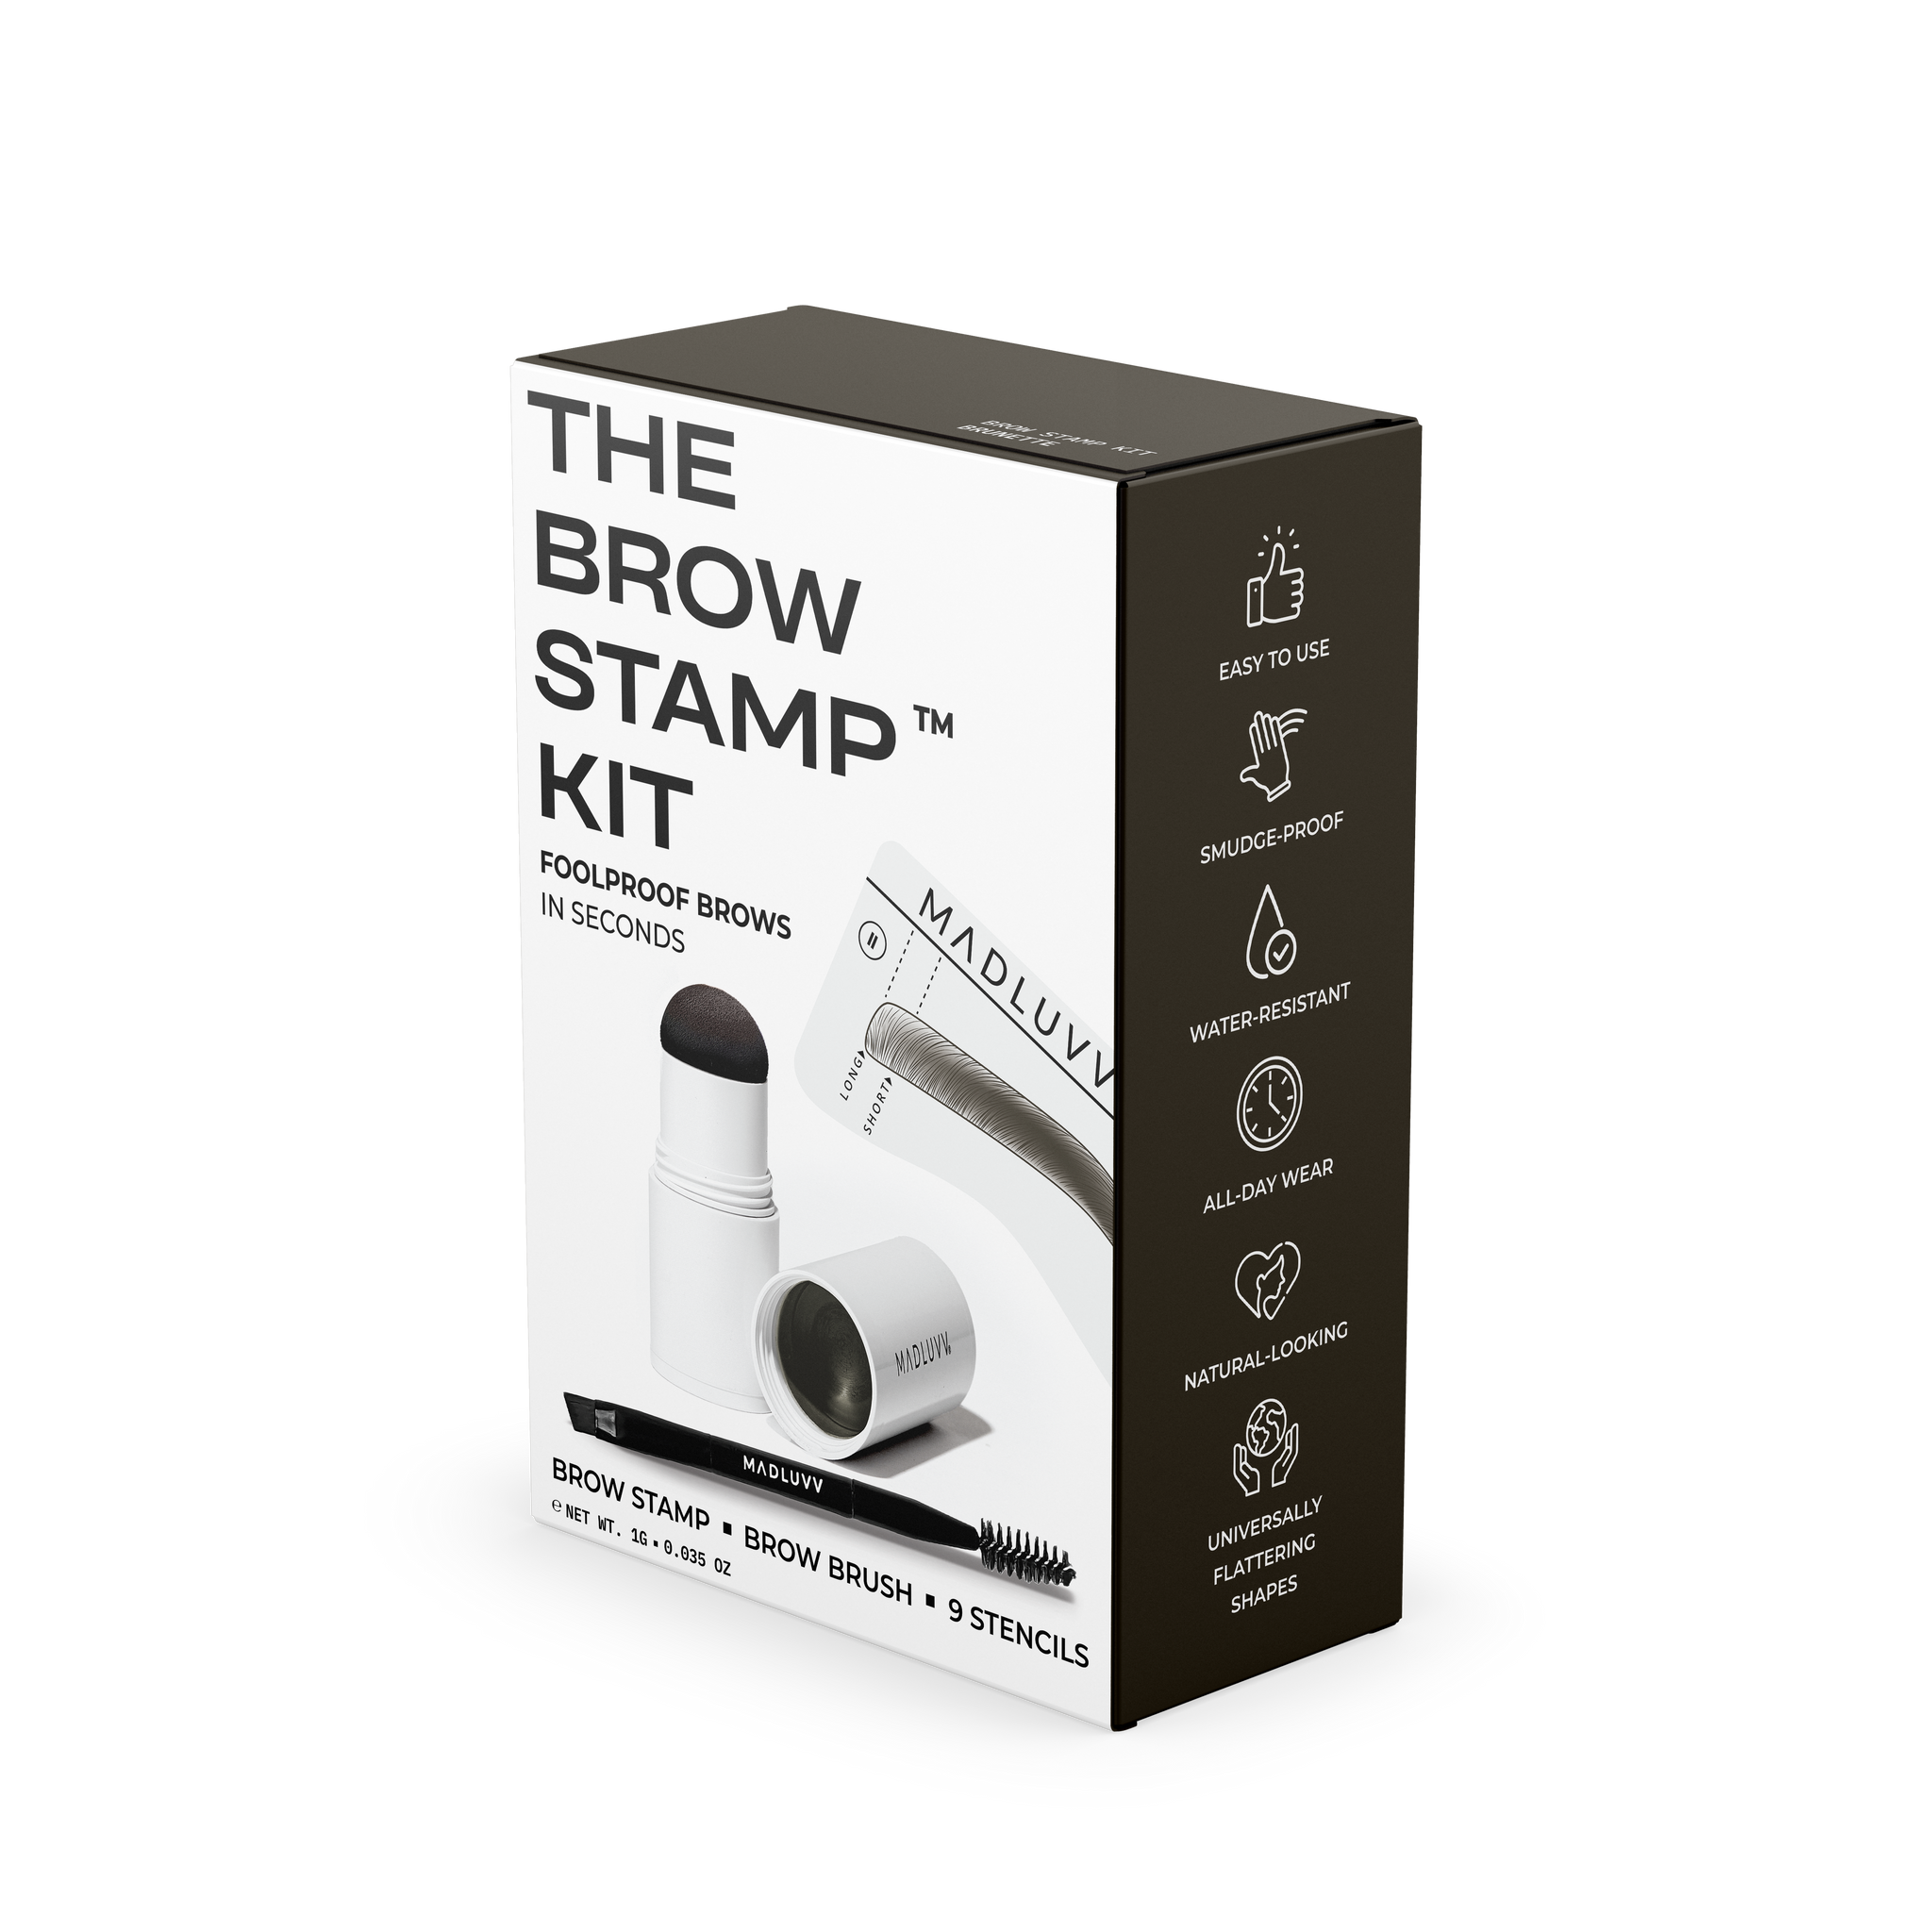 the best brow stamp kit to get